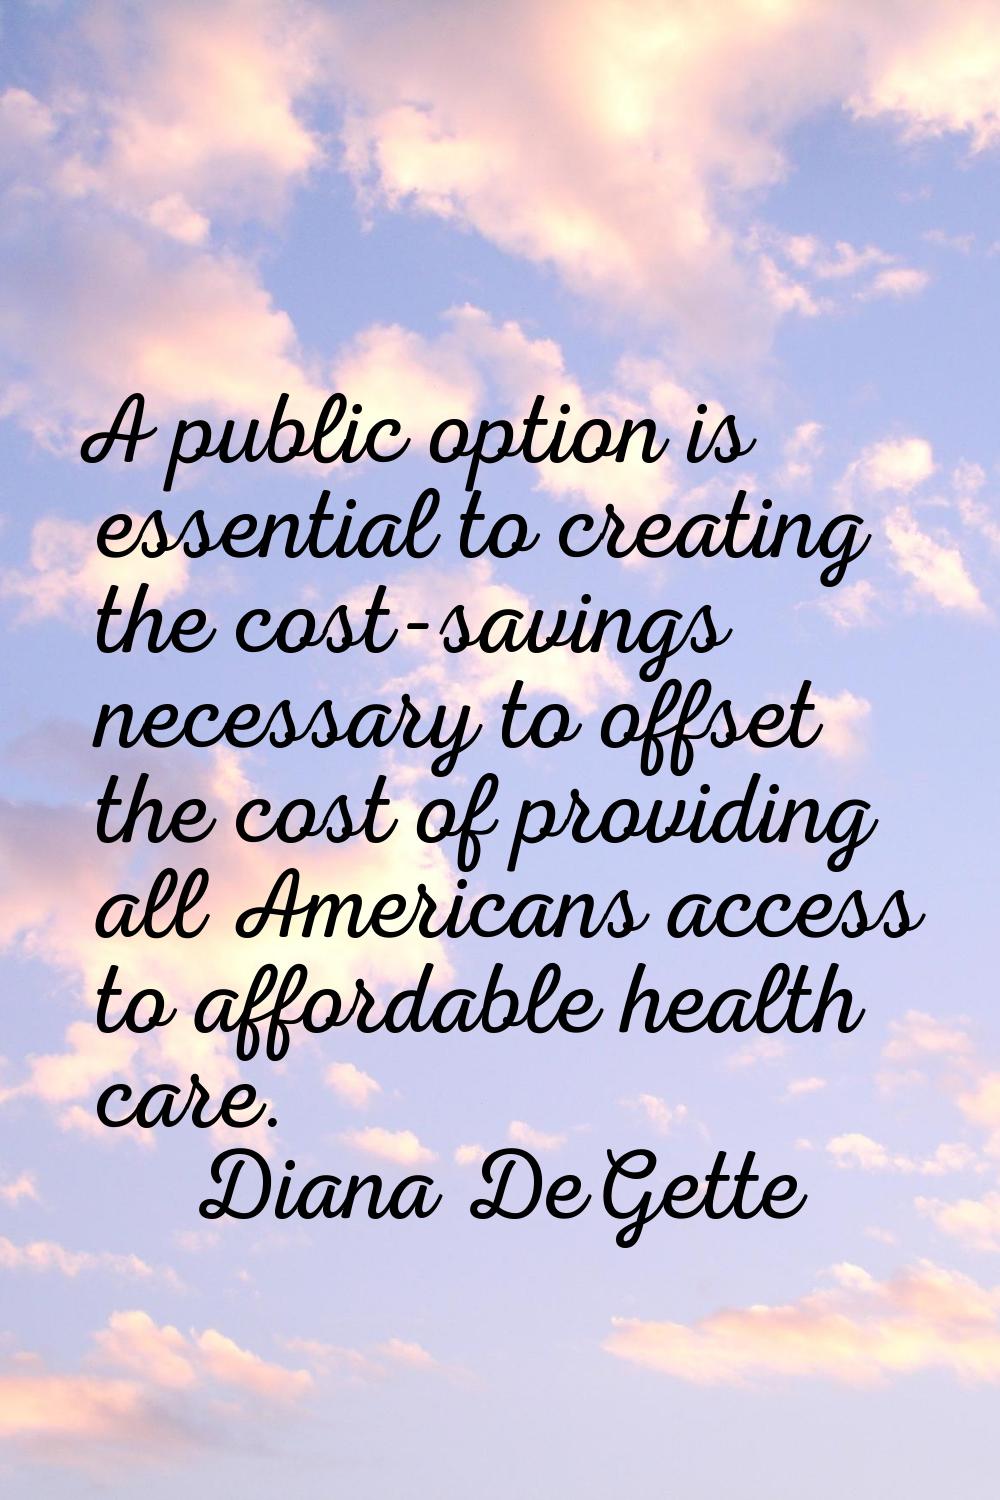 A public option is essential to creating the cost-savings necessary to offset the cost of providing